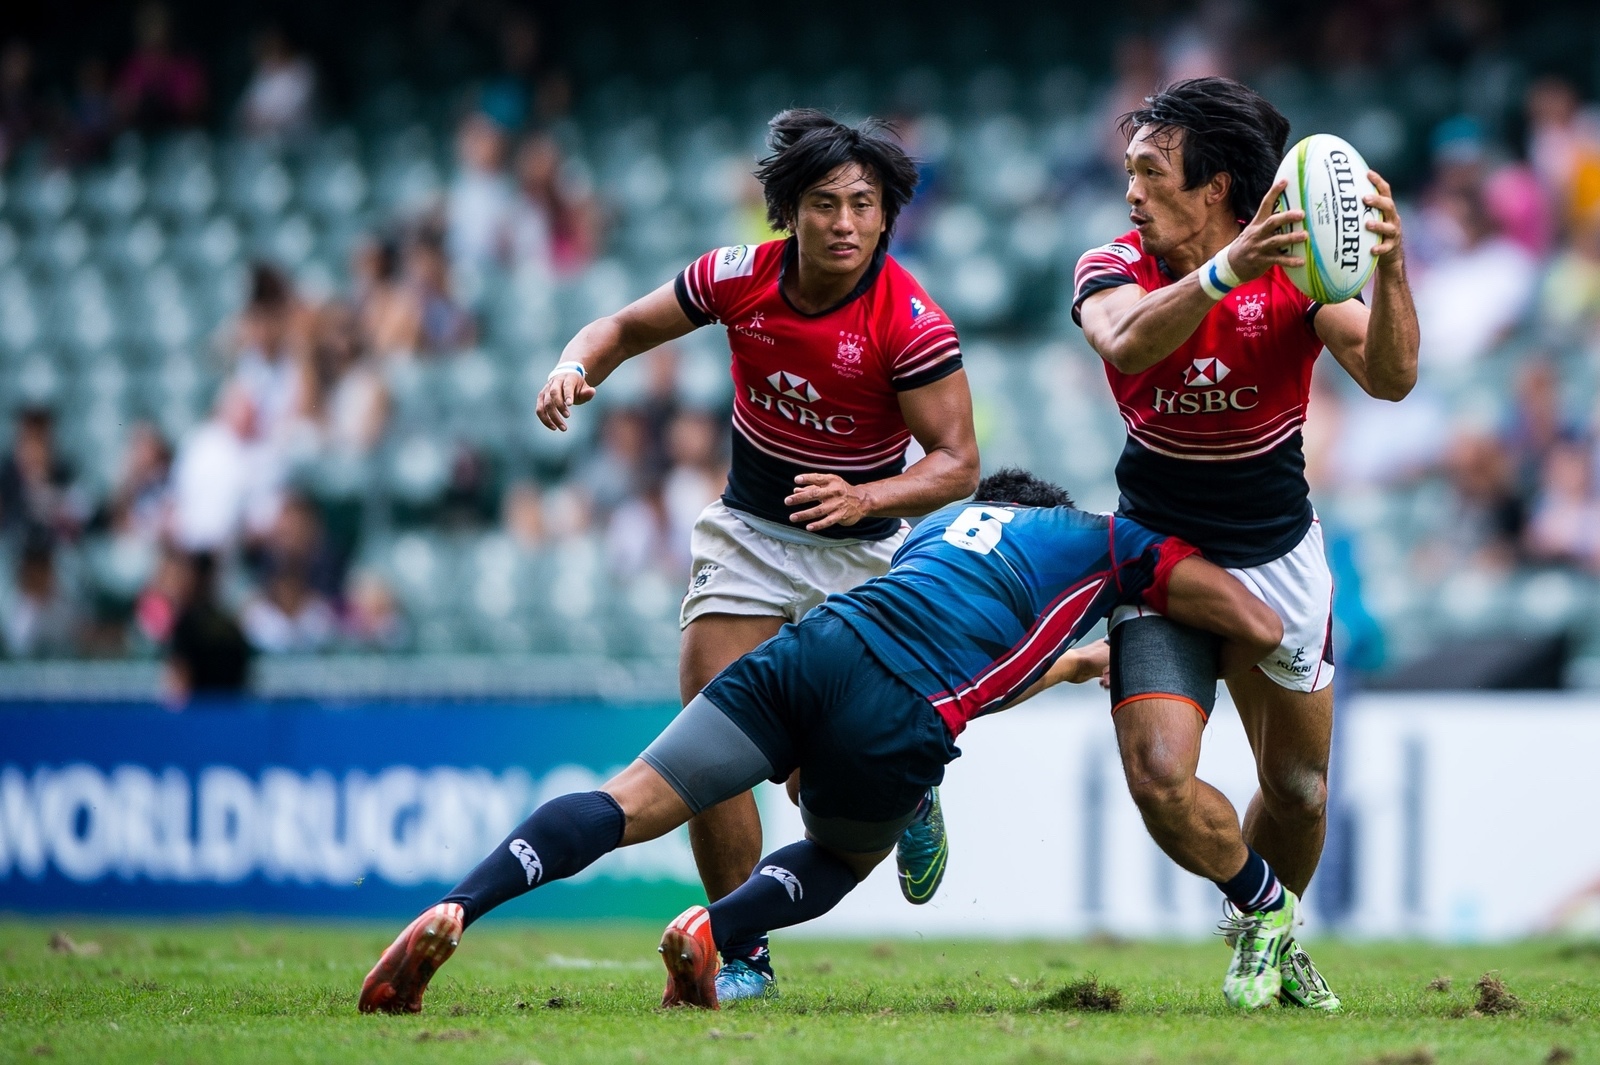 Hong Kong Men’s seven announced for Olympic Repechage